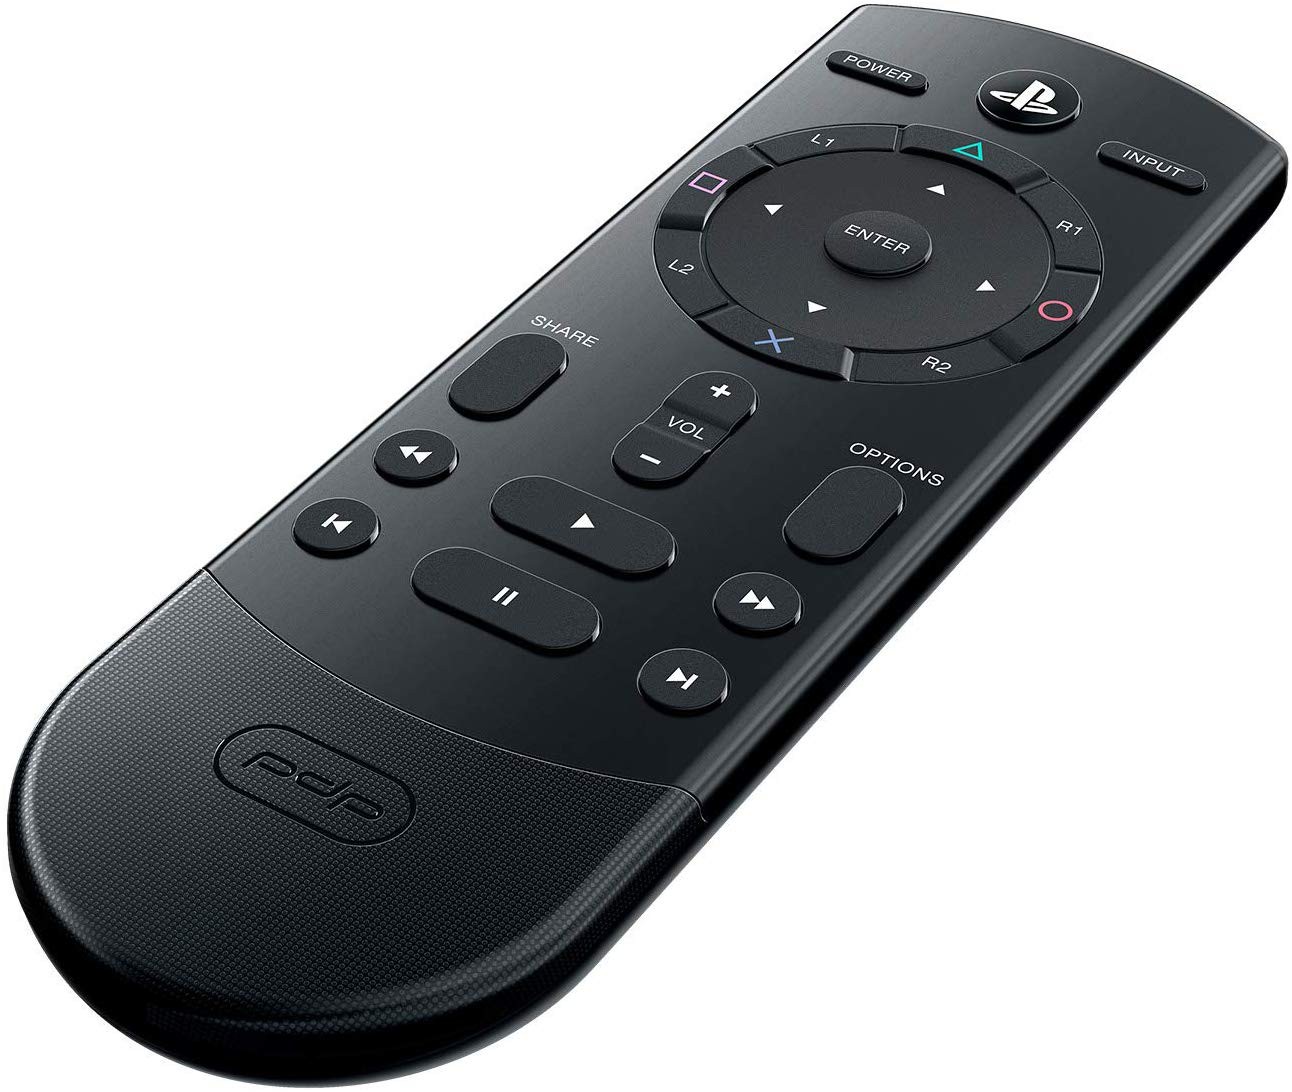 PDP Cloud remote for Playstation 4